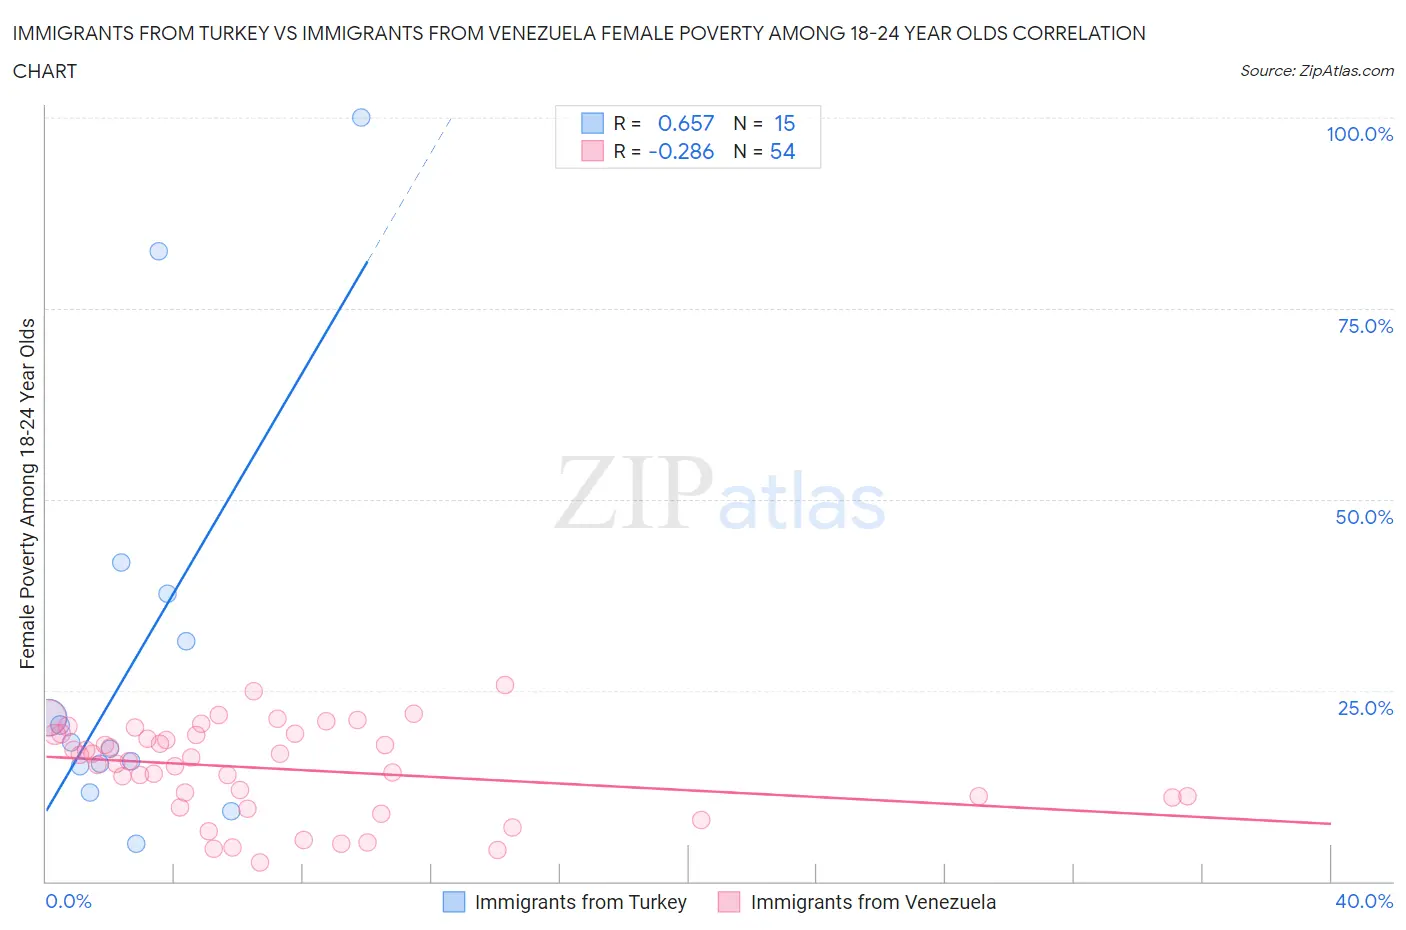 Immigrants from Turkey vs Immigrants from Venezuela Female Poverty Among 18-24 Year Olds